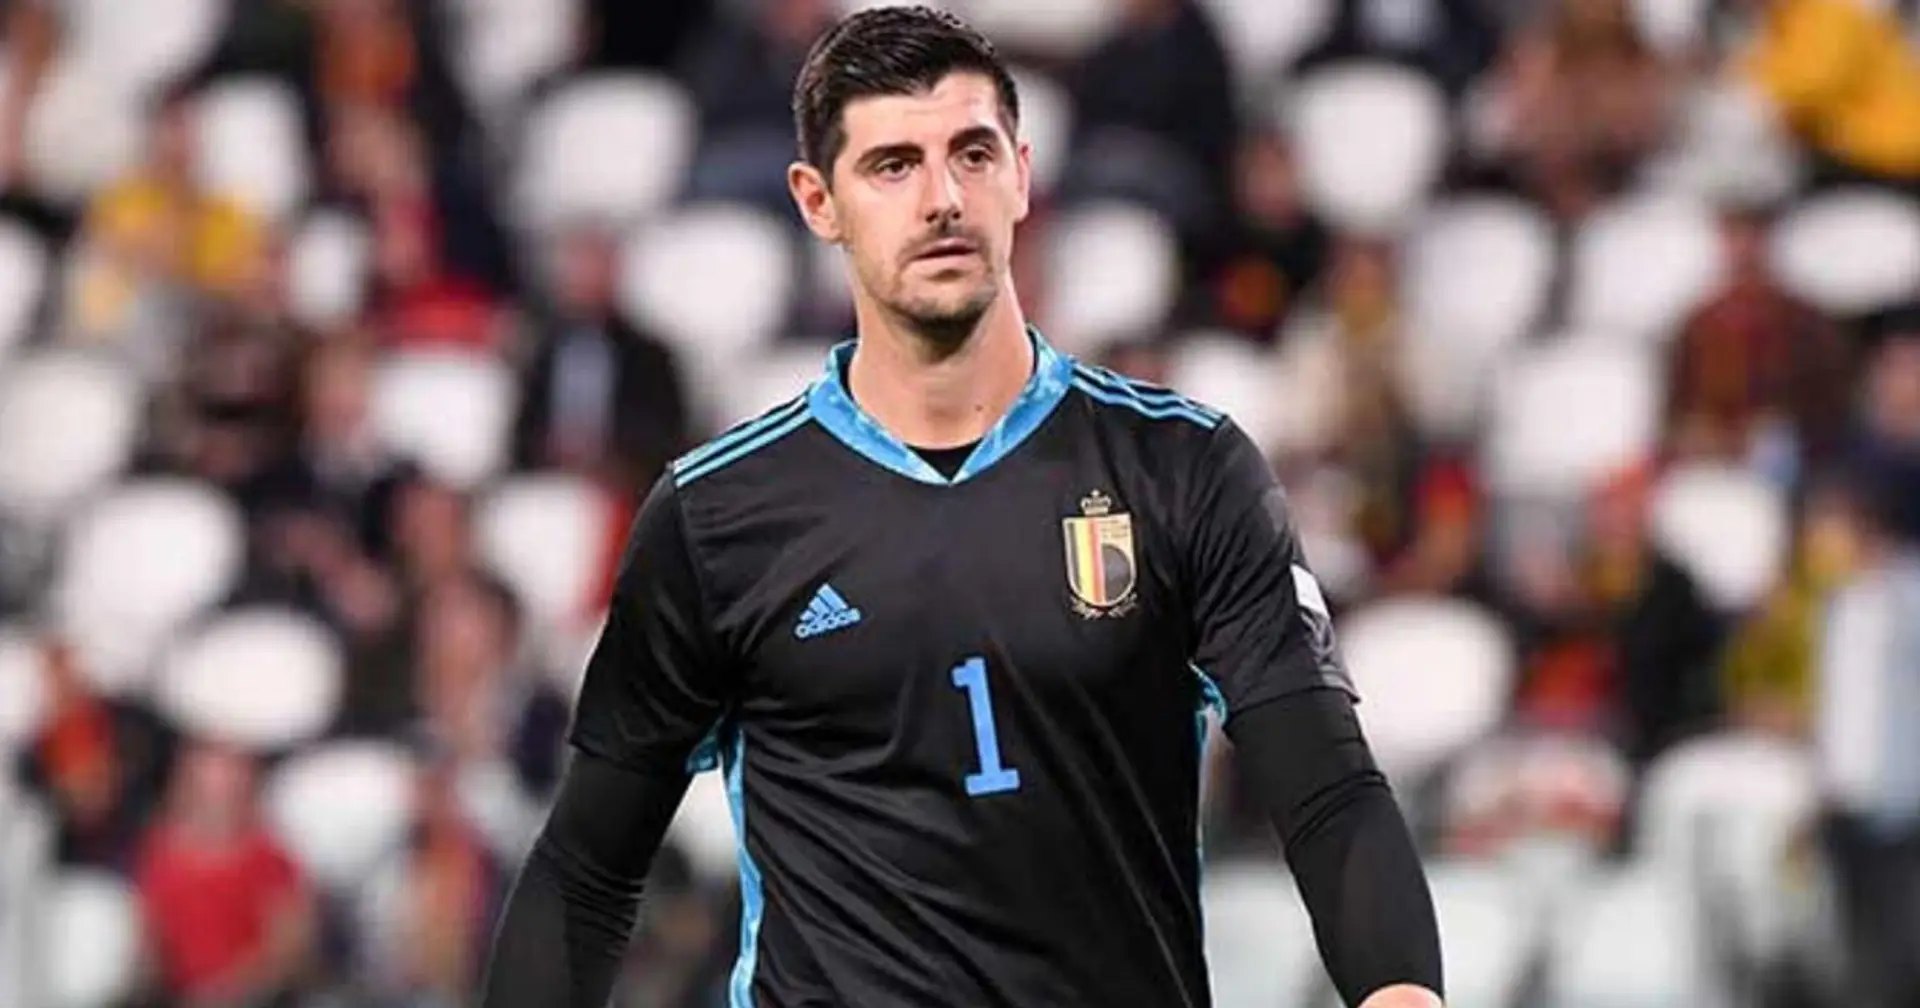 'I don't know why we still play it': Courtois slams UEFA for third-place game in Nations League